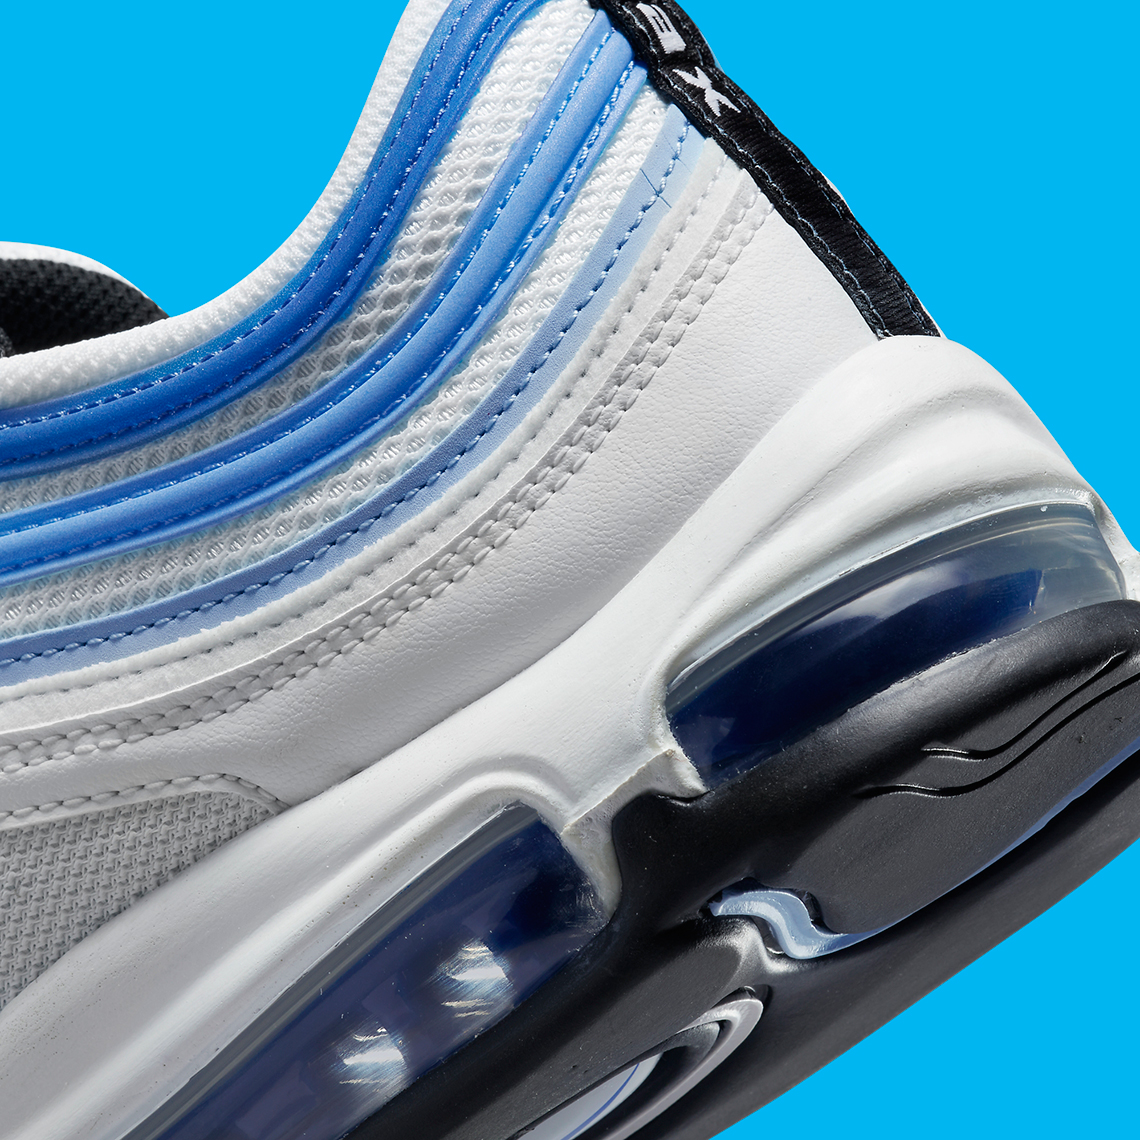 Nike Air Max 97 Blueberry Do8900 100 Release Date 6